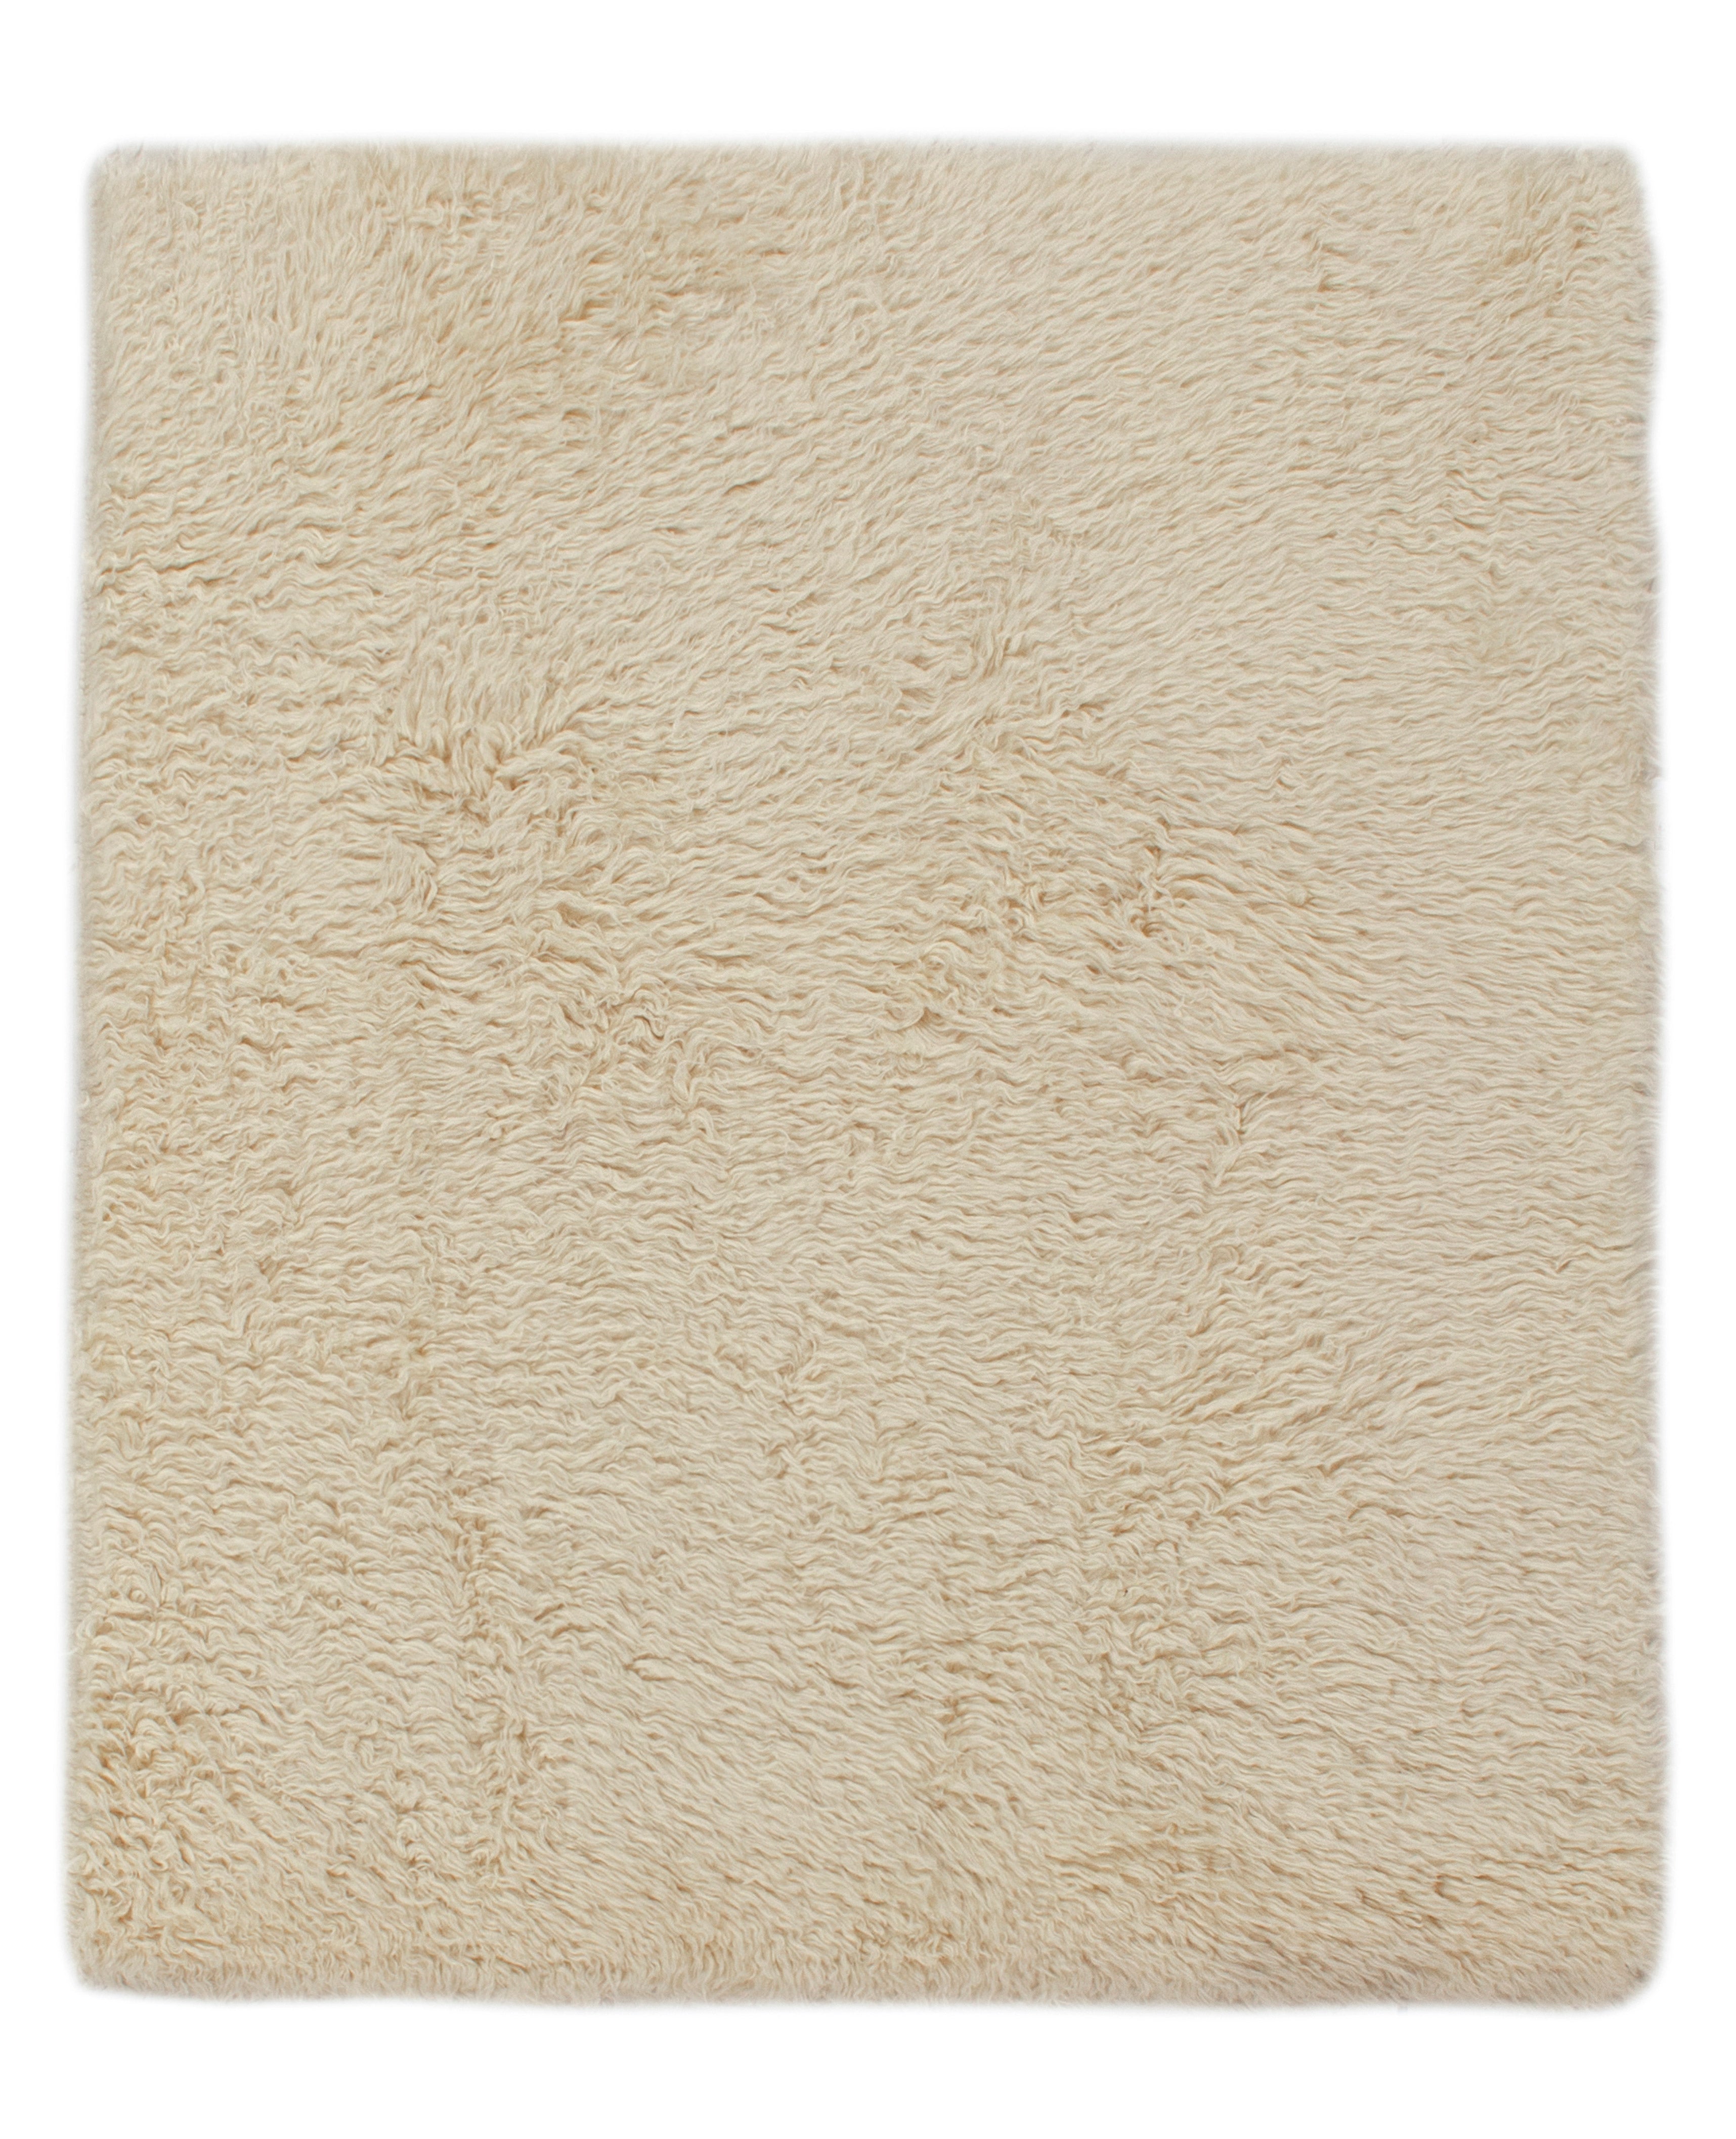 Rug & Kilim’s Moroccan Style Shag Rug in Creamy High-Pile For Sale